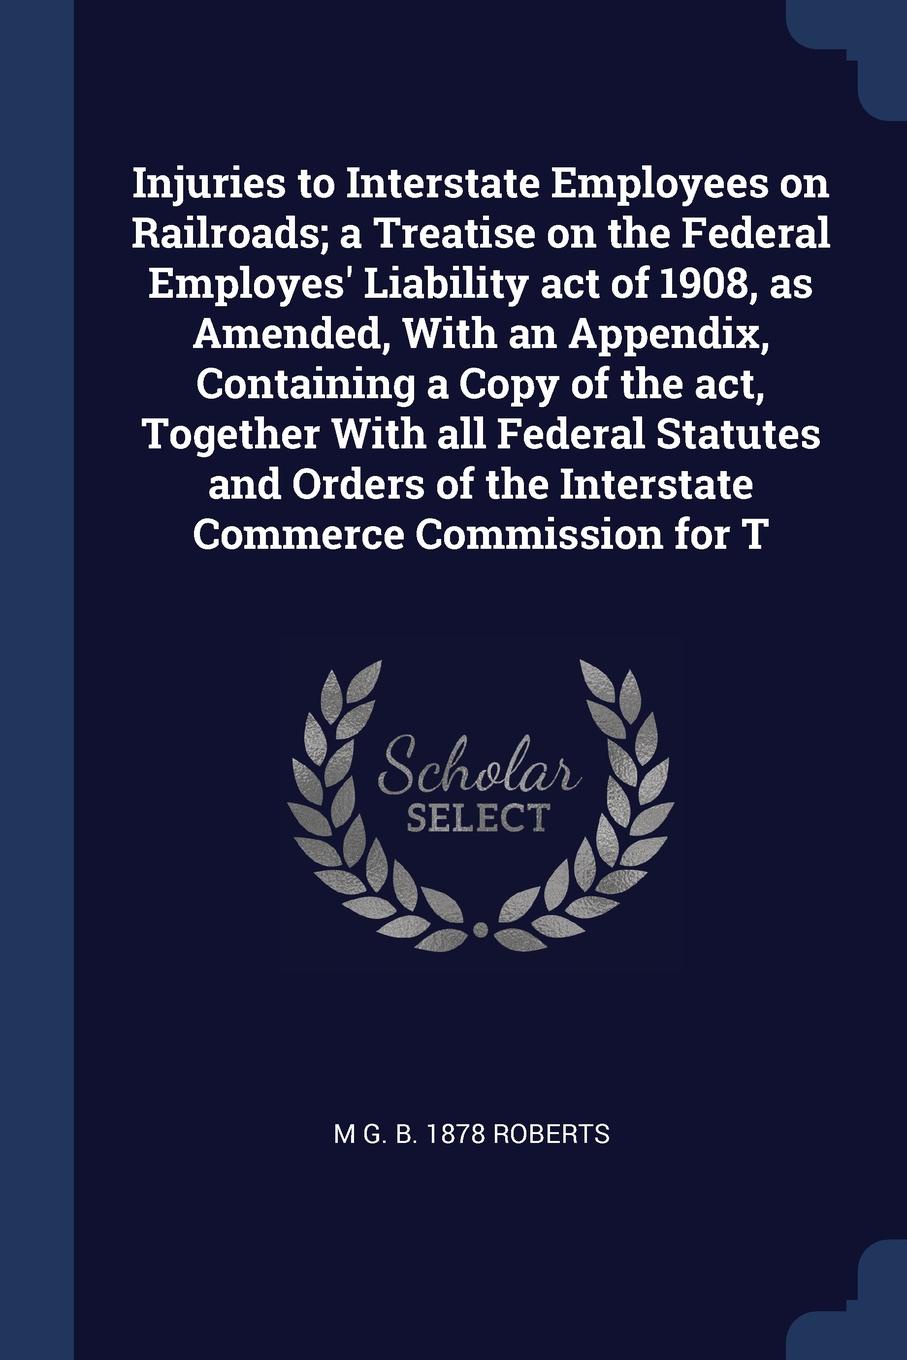 Injuries to Interstate Employees on Railroads; a Treatise on the Federal Employes` Liability act of 1908, as Amended, With an Appendix, Containing a Copy of the act, Together With all Federal Statutes and Orders of the Interstate Commerce Commissi...